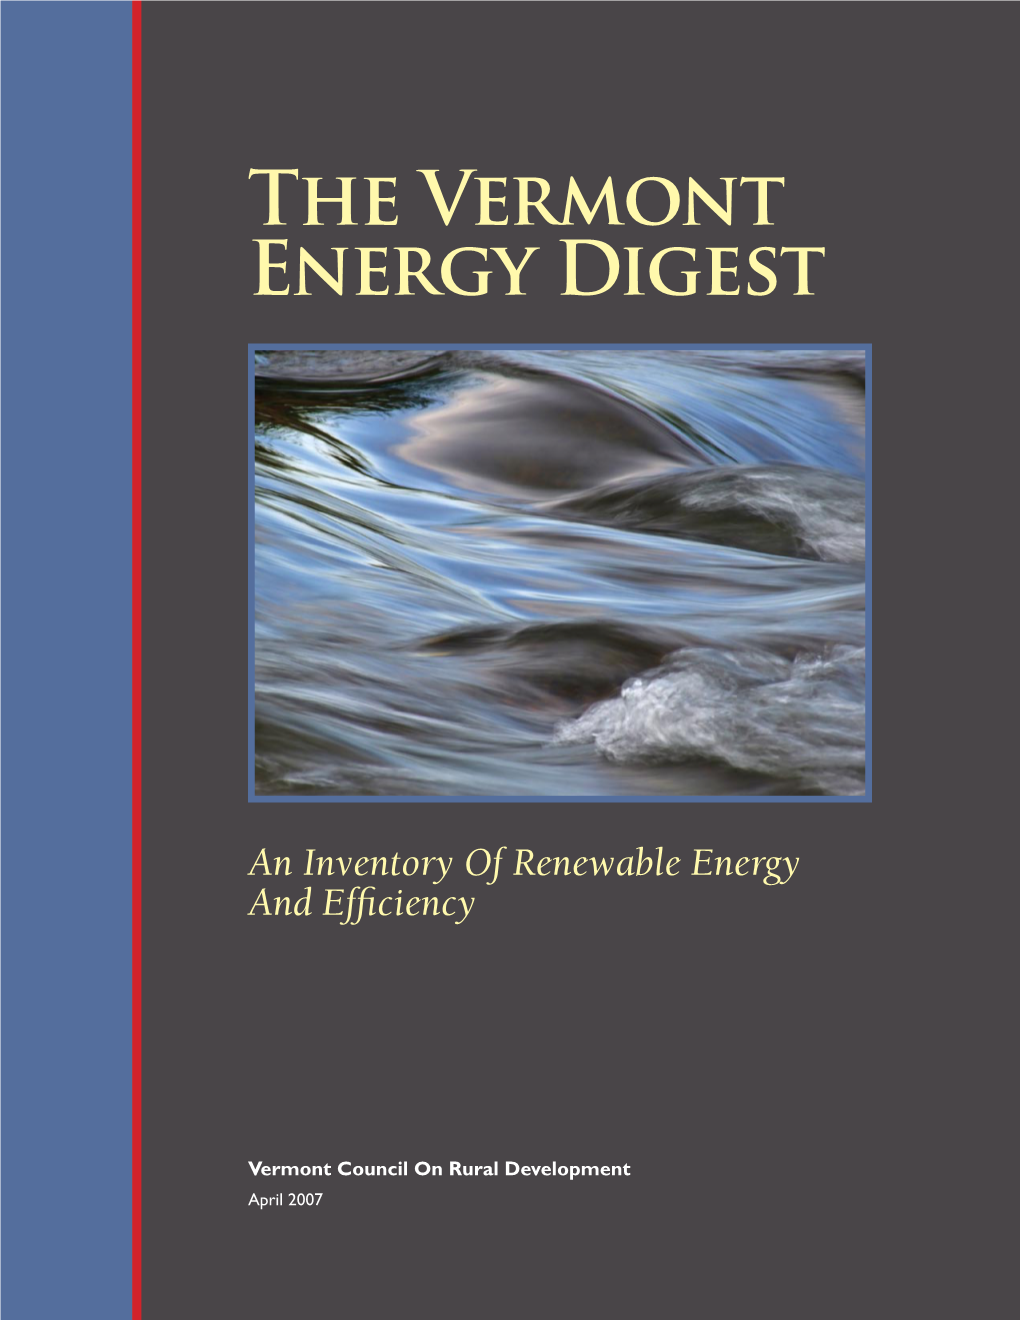 The Vermont Energy Digest